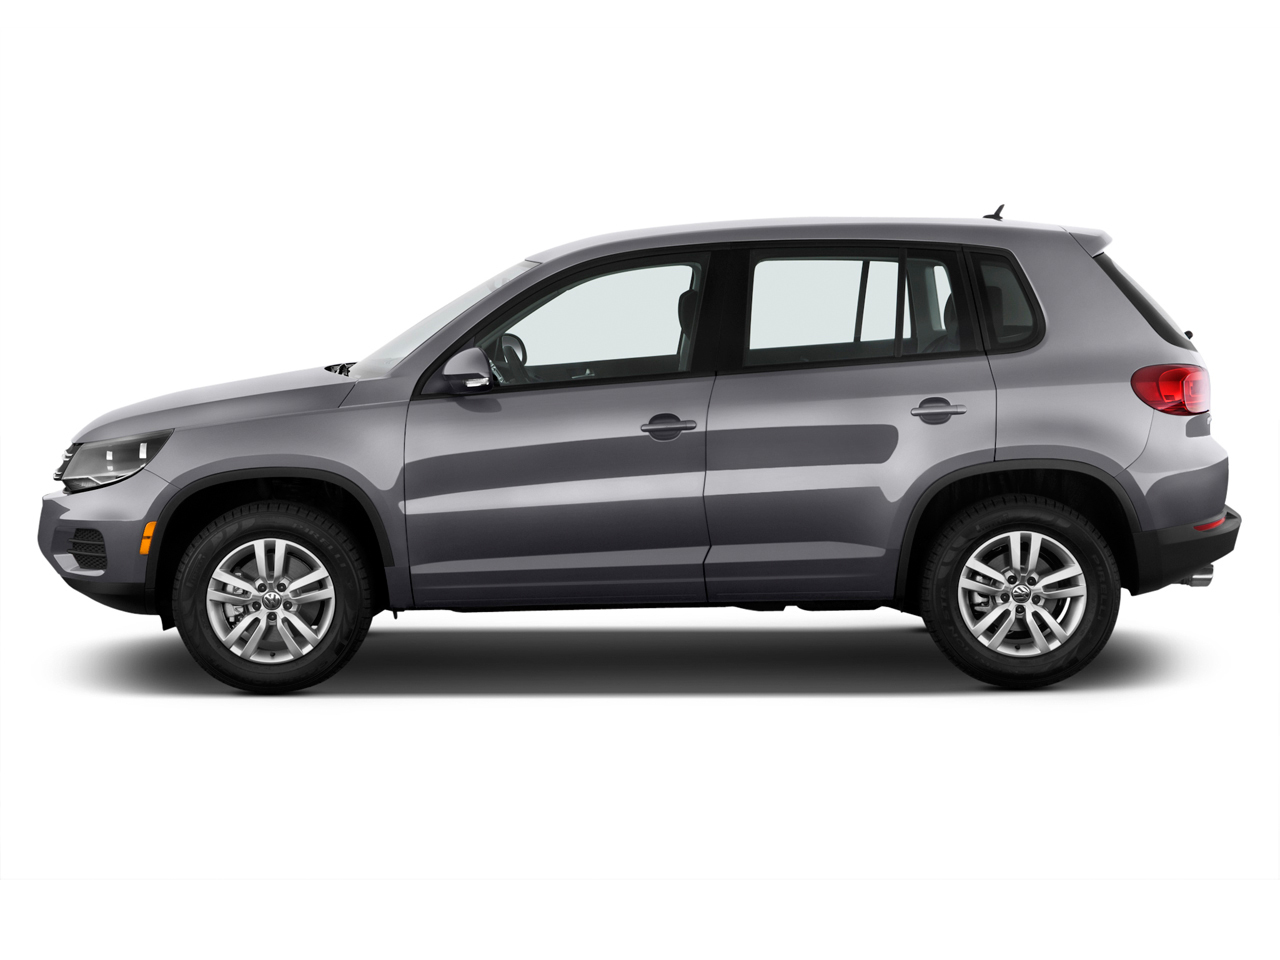 2012 Volkswagen Tiguan (VW) Review, Ratings, Specs, Prices, and Photos -  The Car Connection